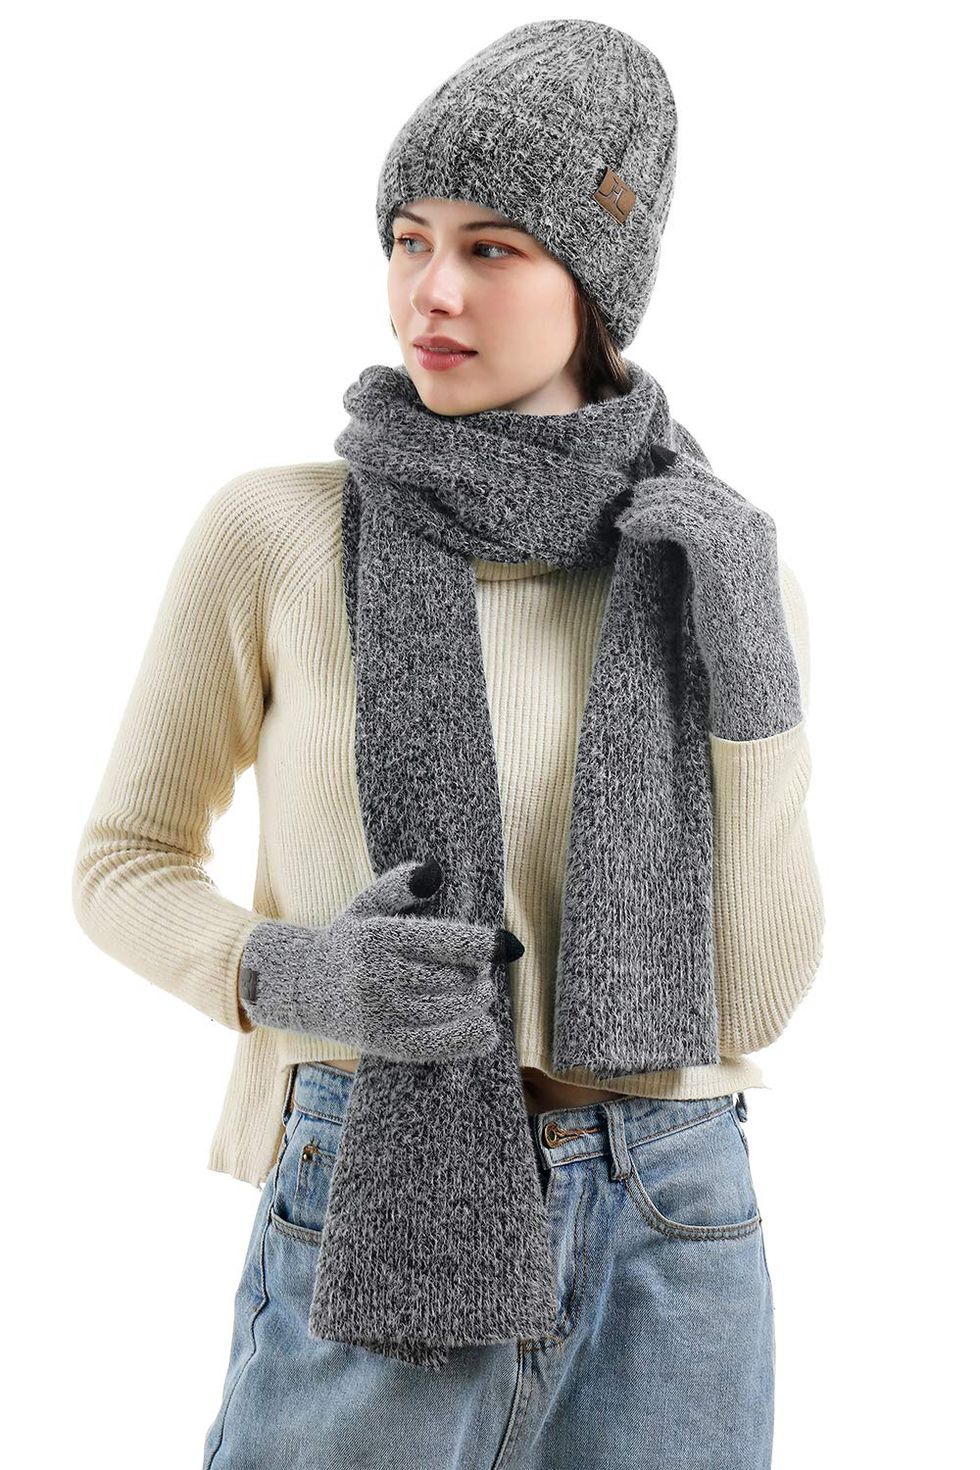 20 Best Scarves for Women - Best Winter Scarves to Shop Now